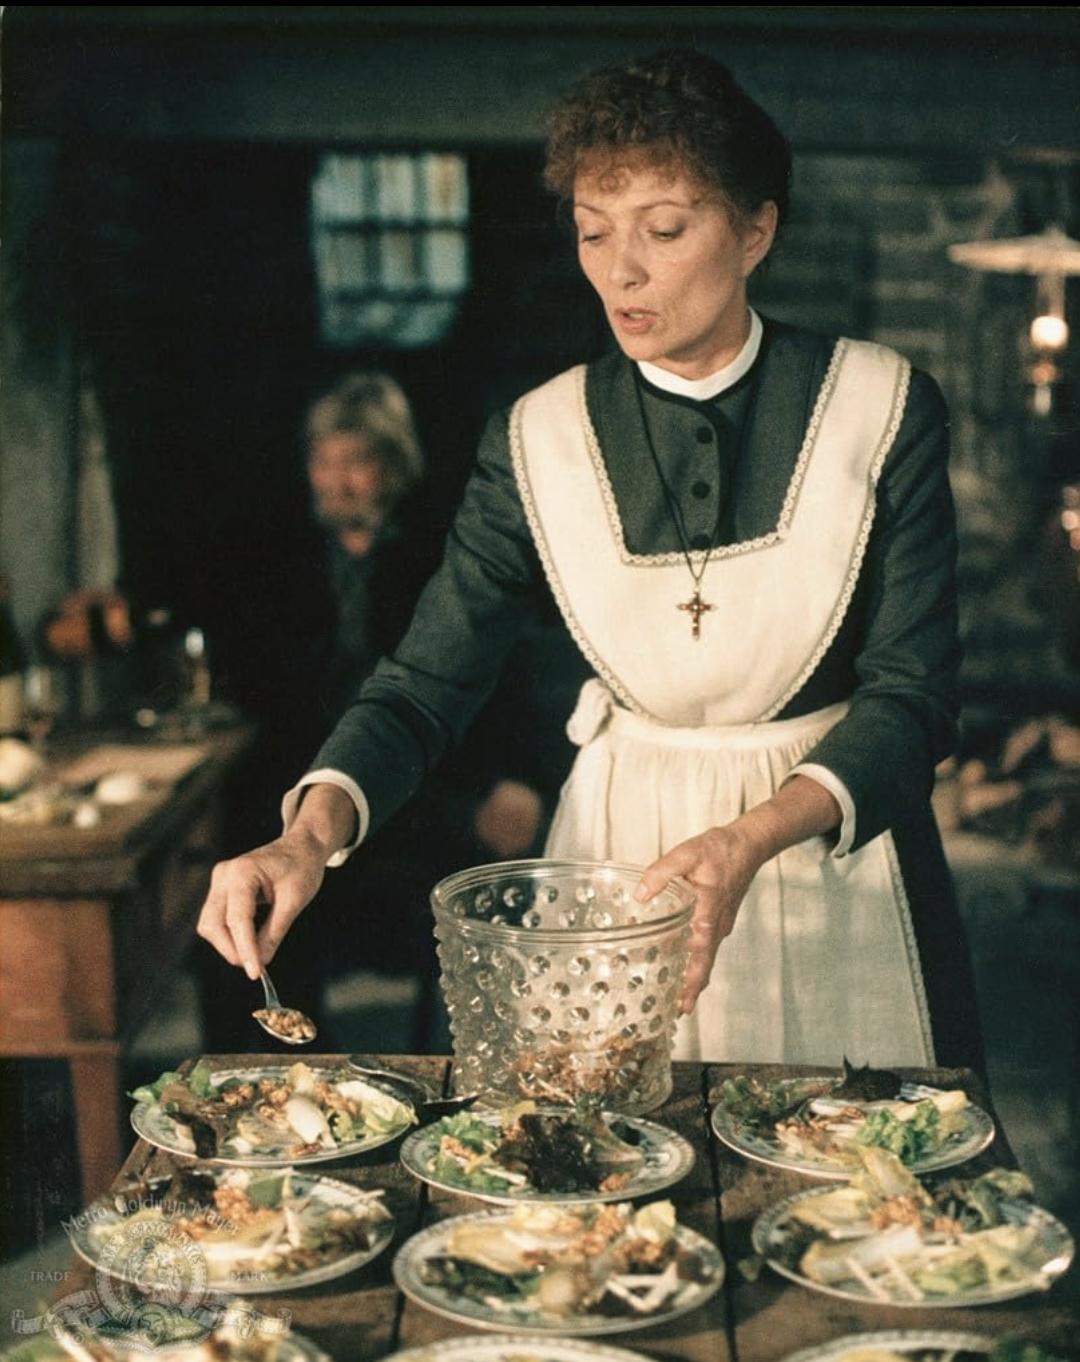 <p>Gabriel Axel's "Babette's Feast" is a unique gem, deserving of its status as the first Danish film to win the Academy Award for Best Foreign Language. The 1987 film tells the story of Babette a French refugee named Babette who —you guessed it— prepares a massive feast. The sumptuous banquet features dishes like Potage à la Tortue, Blinis Demidoff, and Cailles en Sarcophage, proving the movie's main argument that food can be a work of art, and we second that.</p>